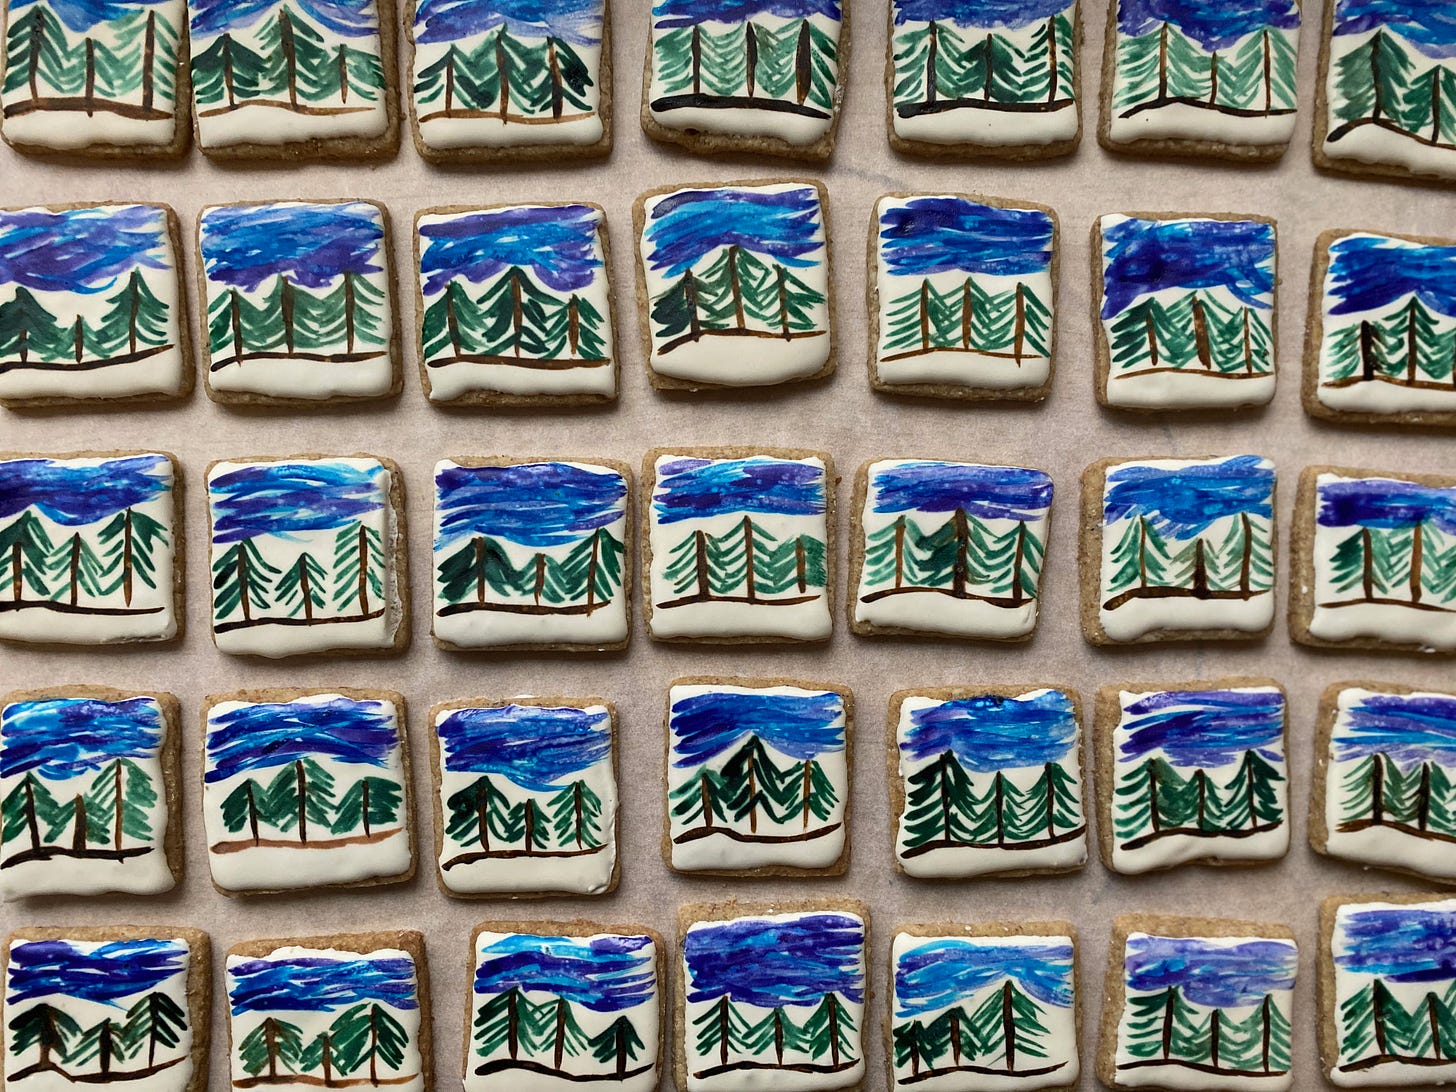 A closeup of several dozen small square cardamom rye cookies, lined up in rows. The cookies are frosted white, and have small painted scenes on them: three evergreen trees under a blue sky.